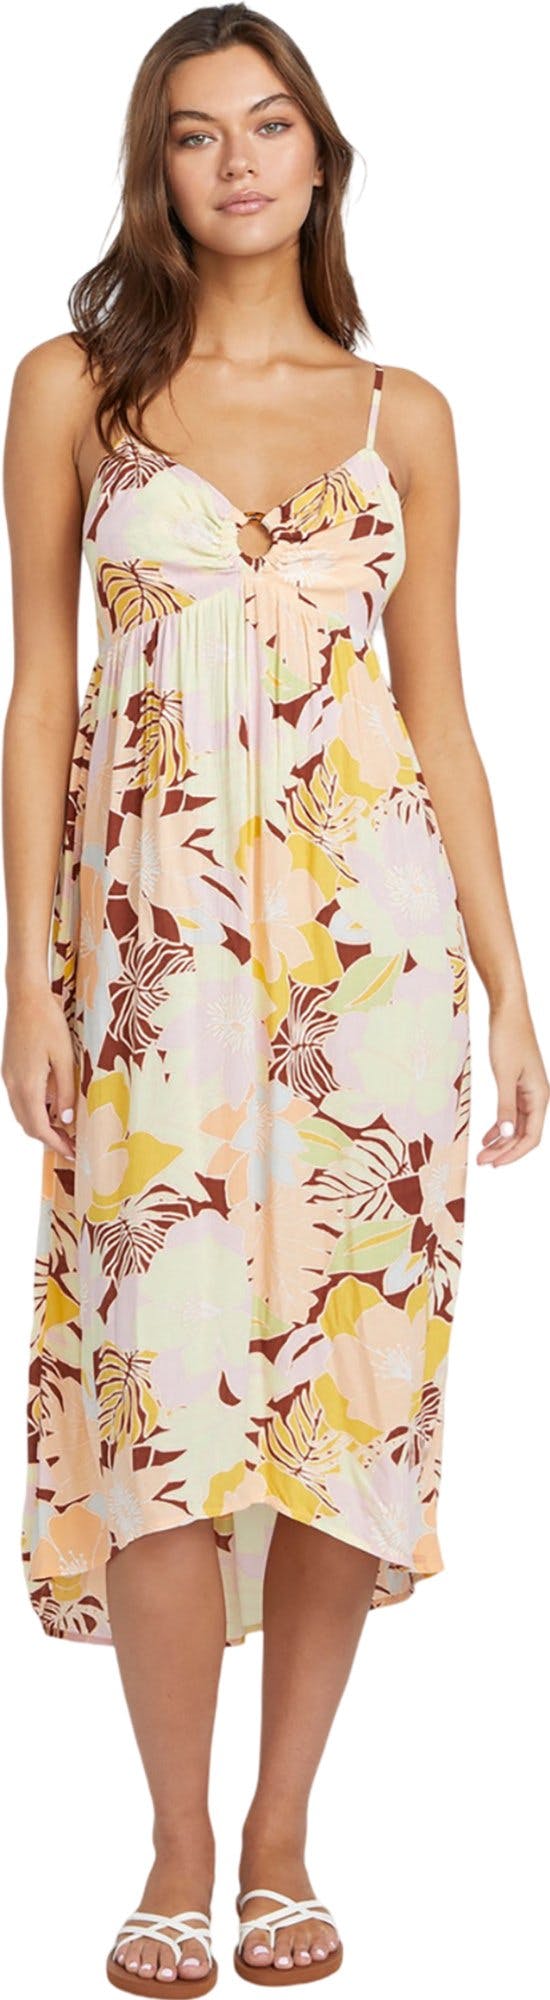 Product image for Oh Lei Maxi Dress - Women's